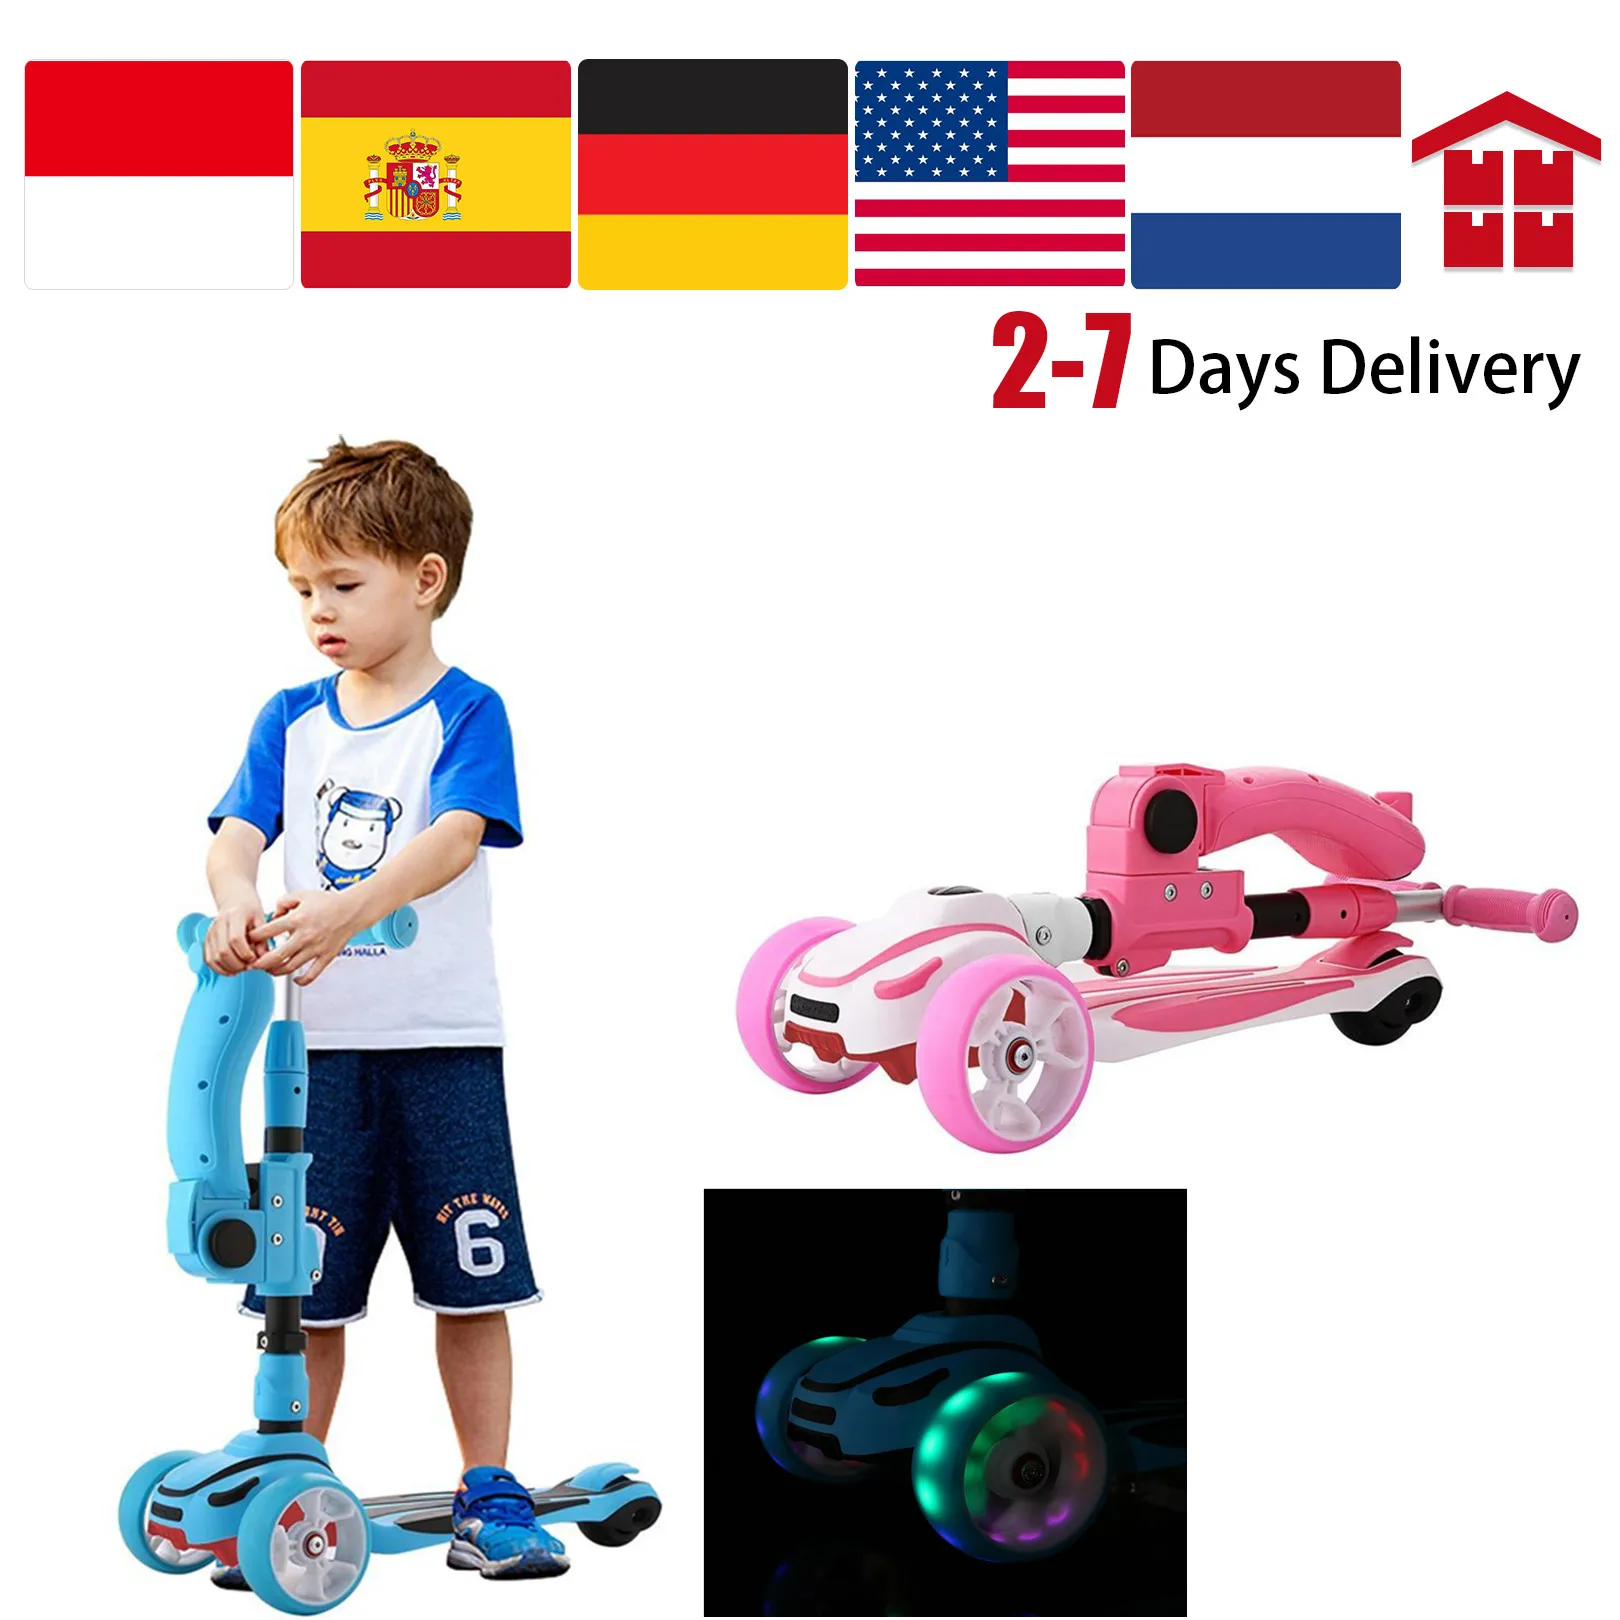 Height Kick Scooter With Folding Seat Flashing Wheels Kids Adjustable  Wide Deck 22.4x10.4x29.9inch